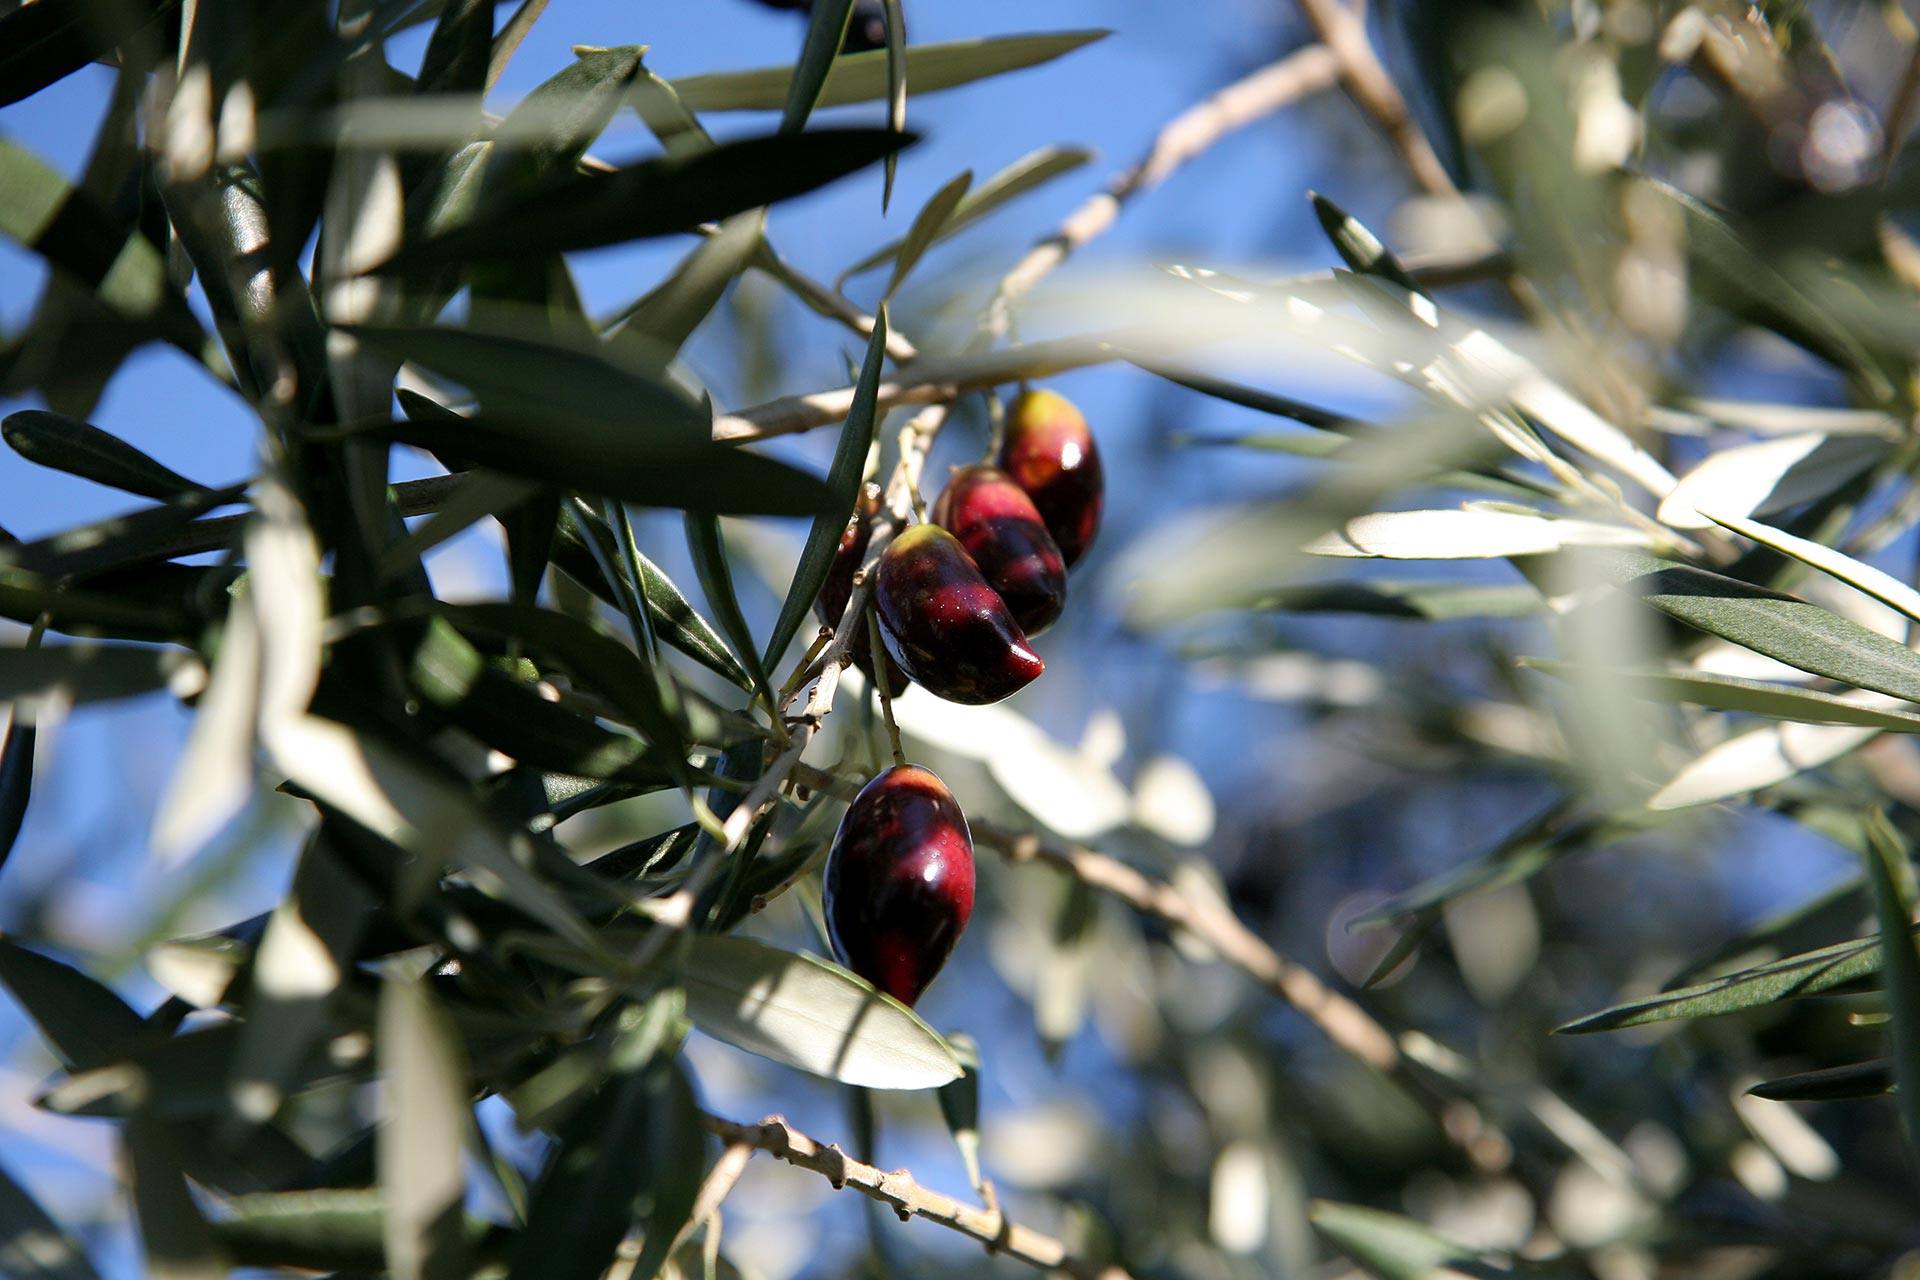 Local produce - olives and olive groves